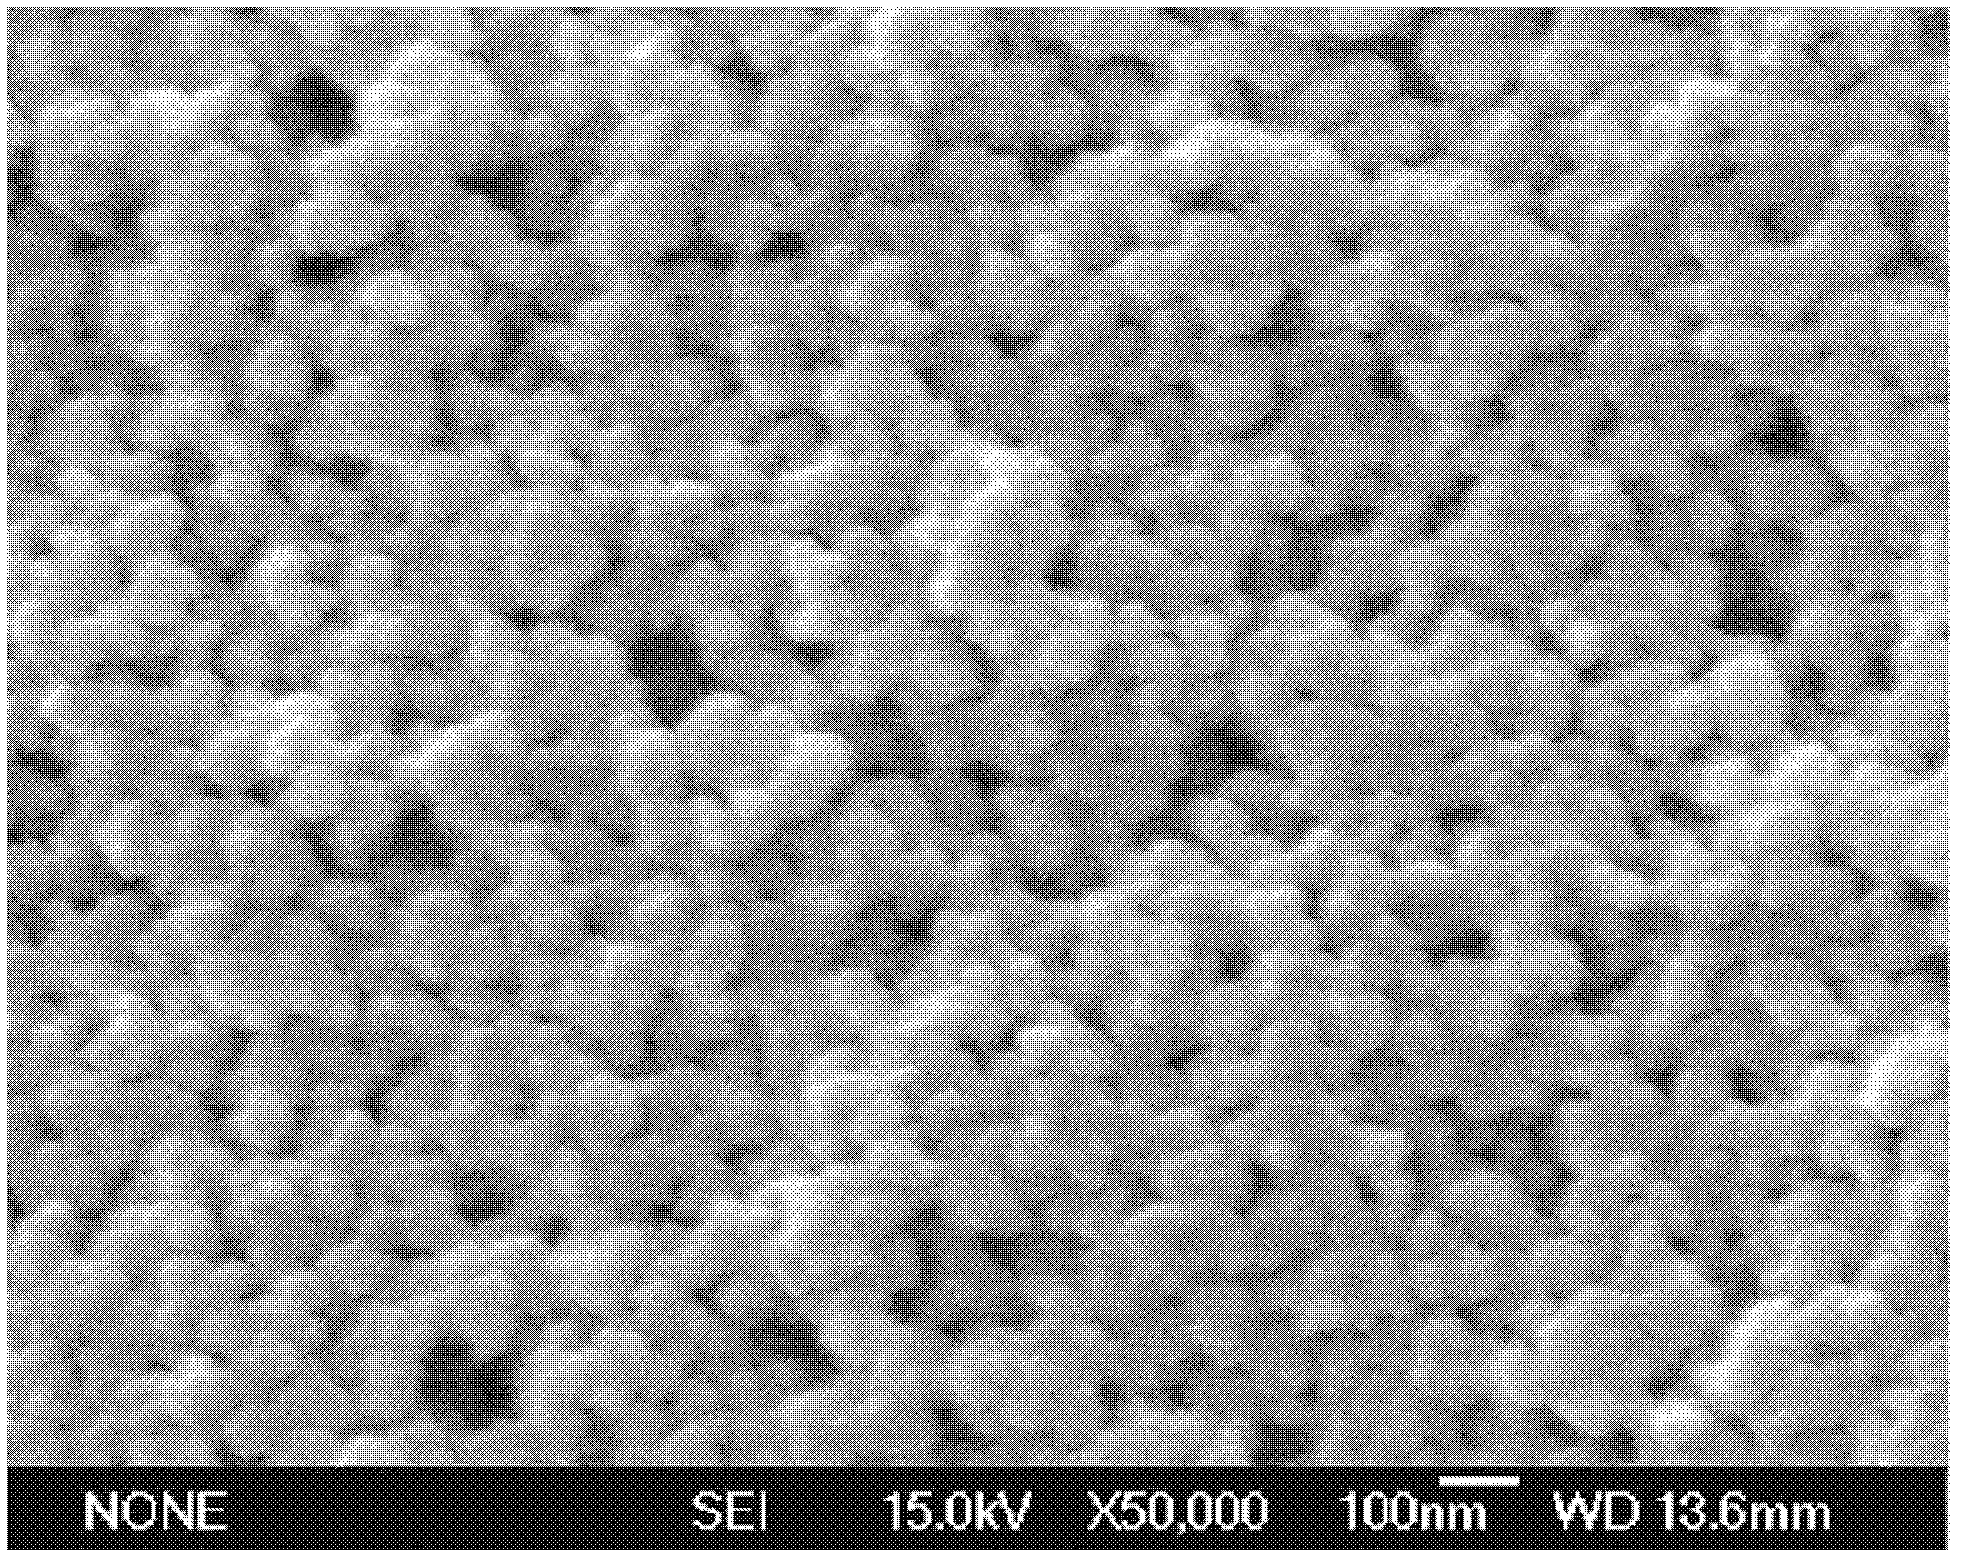 Method for preparing lithium iron phosphate/carbon composite material by using aniline